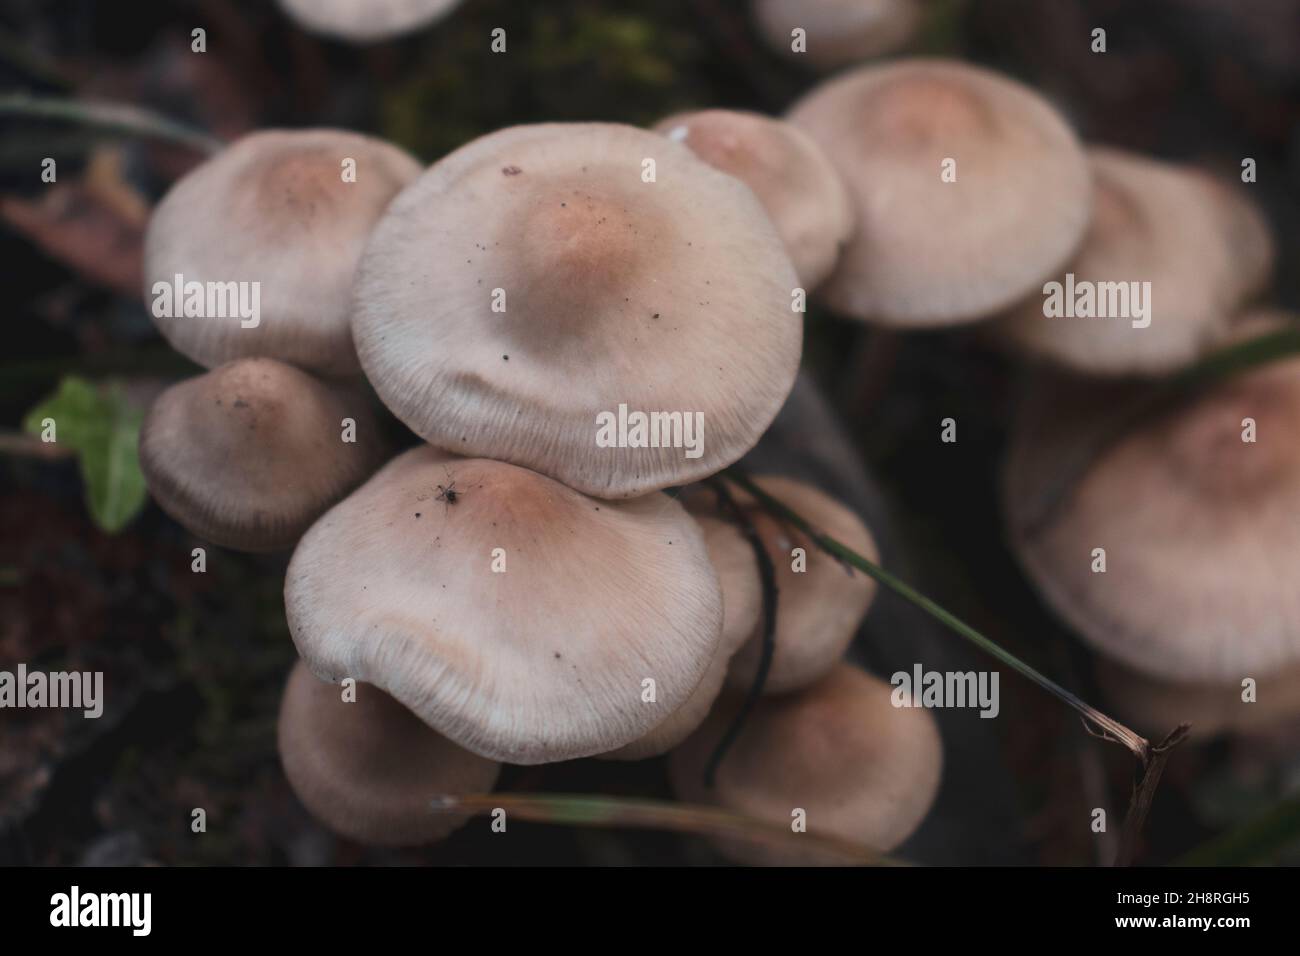 Top view of a group of unedible mushrooms (belonging to Inocybe genus). An insect lays on one of the mushrooms. Stock Photo